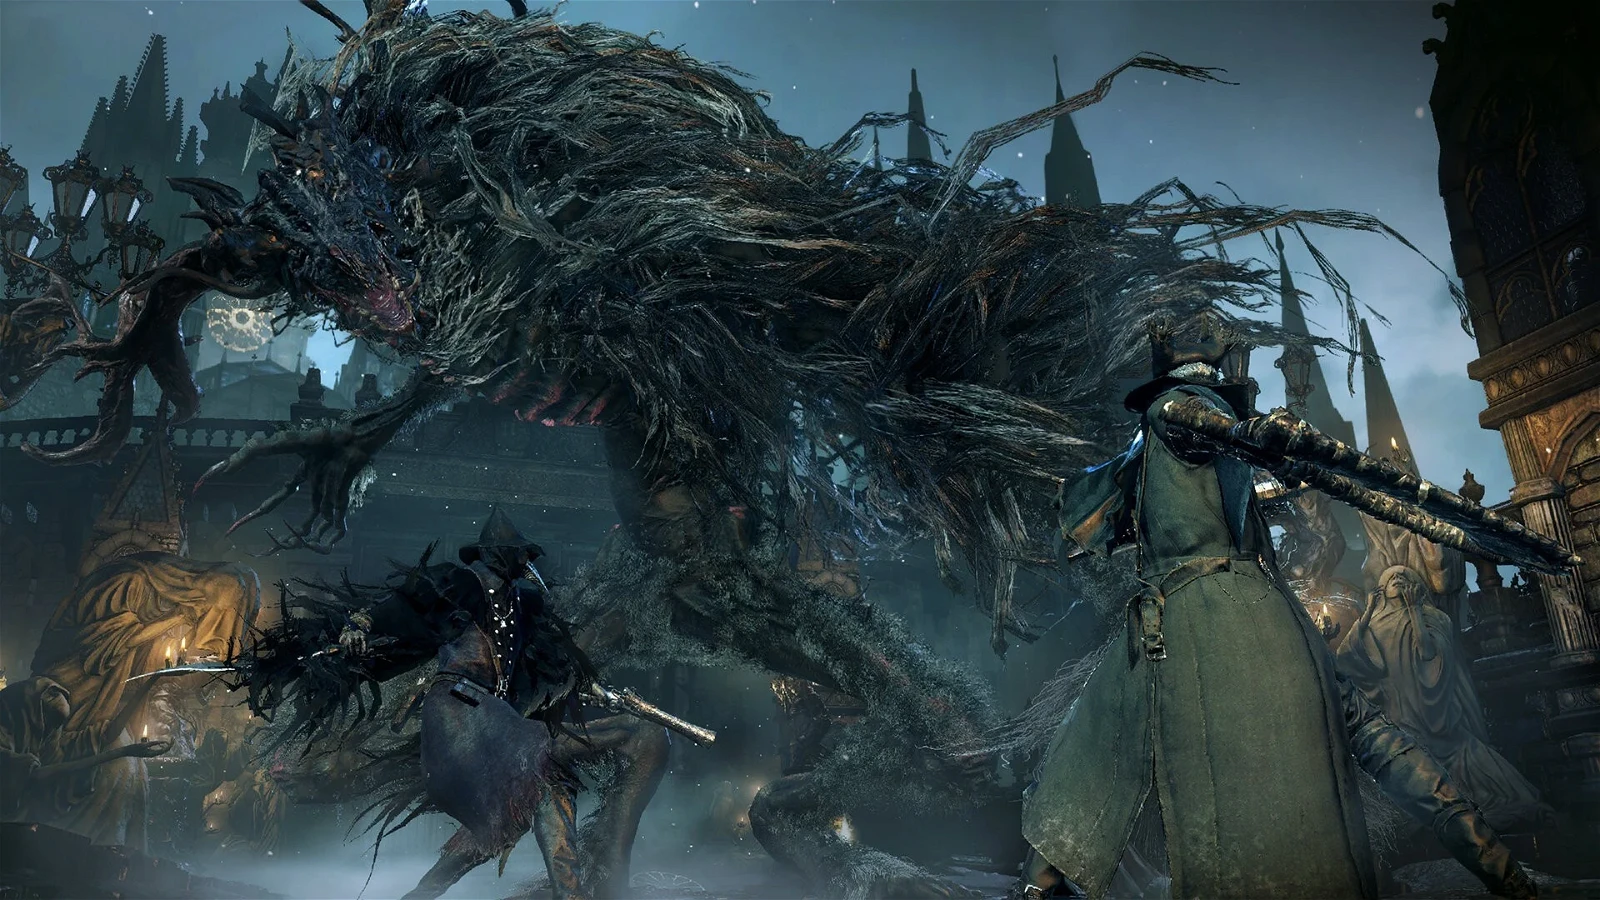 Bloodborne's ambition could've easily diluted FromSoftware's ethos, but they didn't let that happen.